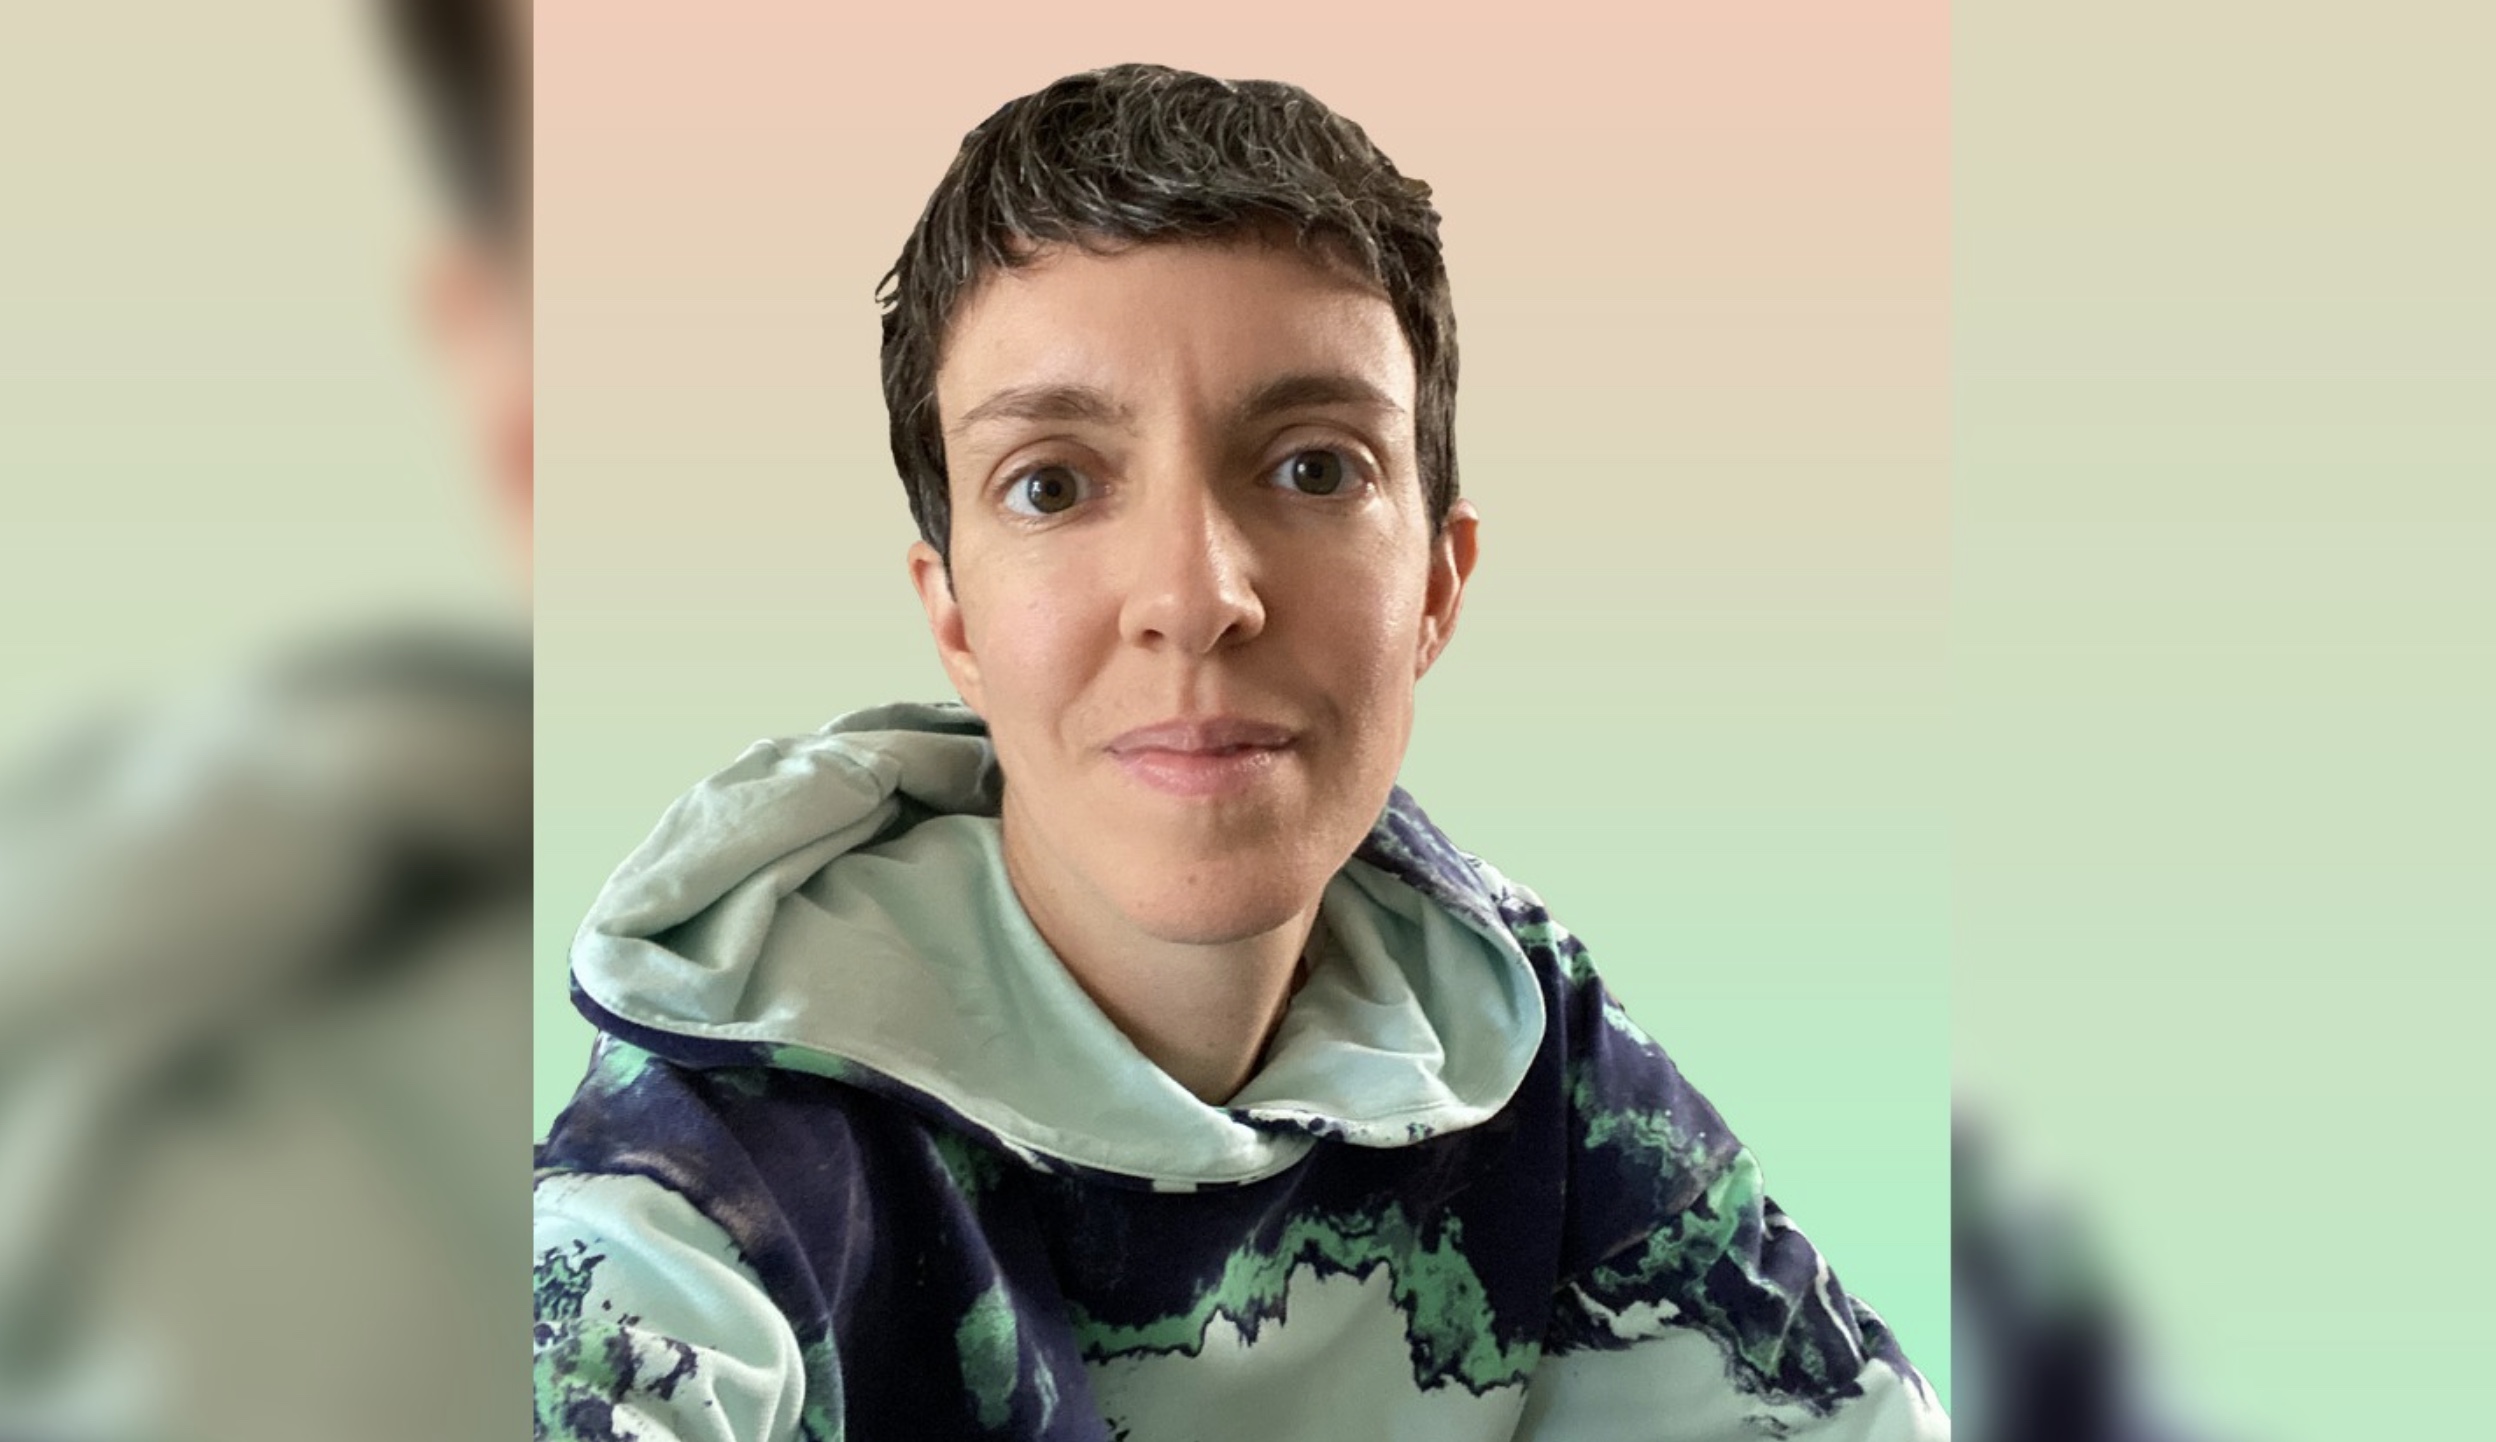 portrait of a white, gender-ambiguous person, with short brown hair, hazel eyes, and a warm smile. they are wearing a hoodie with an all-over-print of a synthetic-sliced-mineral-looking, acid pattern that is seafoam green, light cyan, and navy blue. behind them is an artificial background gradient that is peach at the top and seafoam green at the bottom. #acidtropical